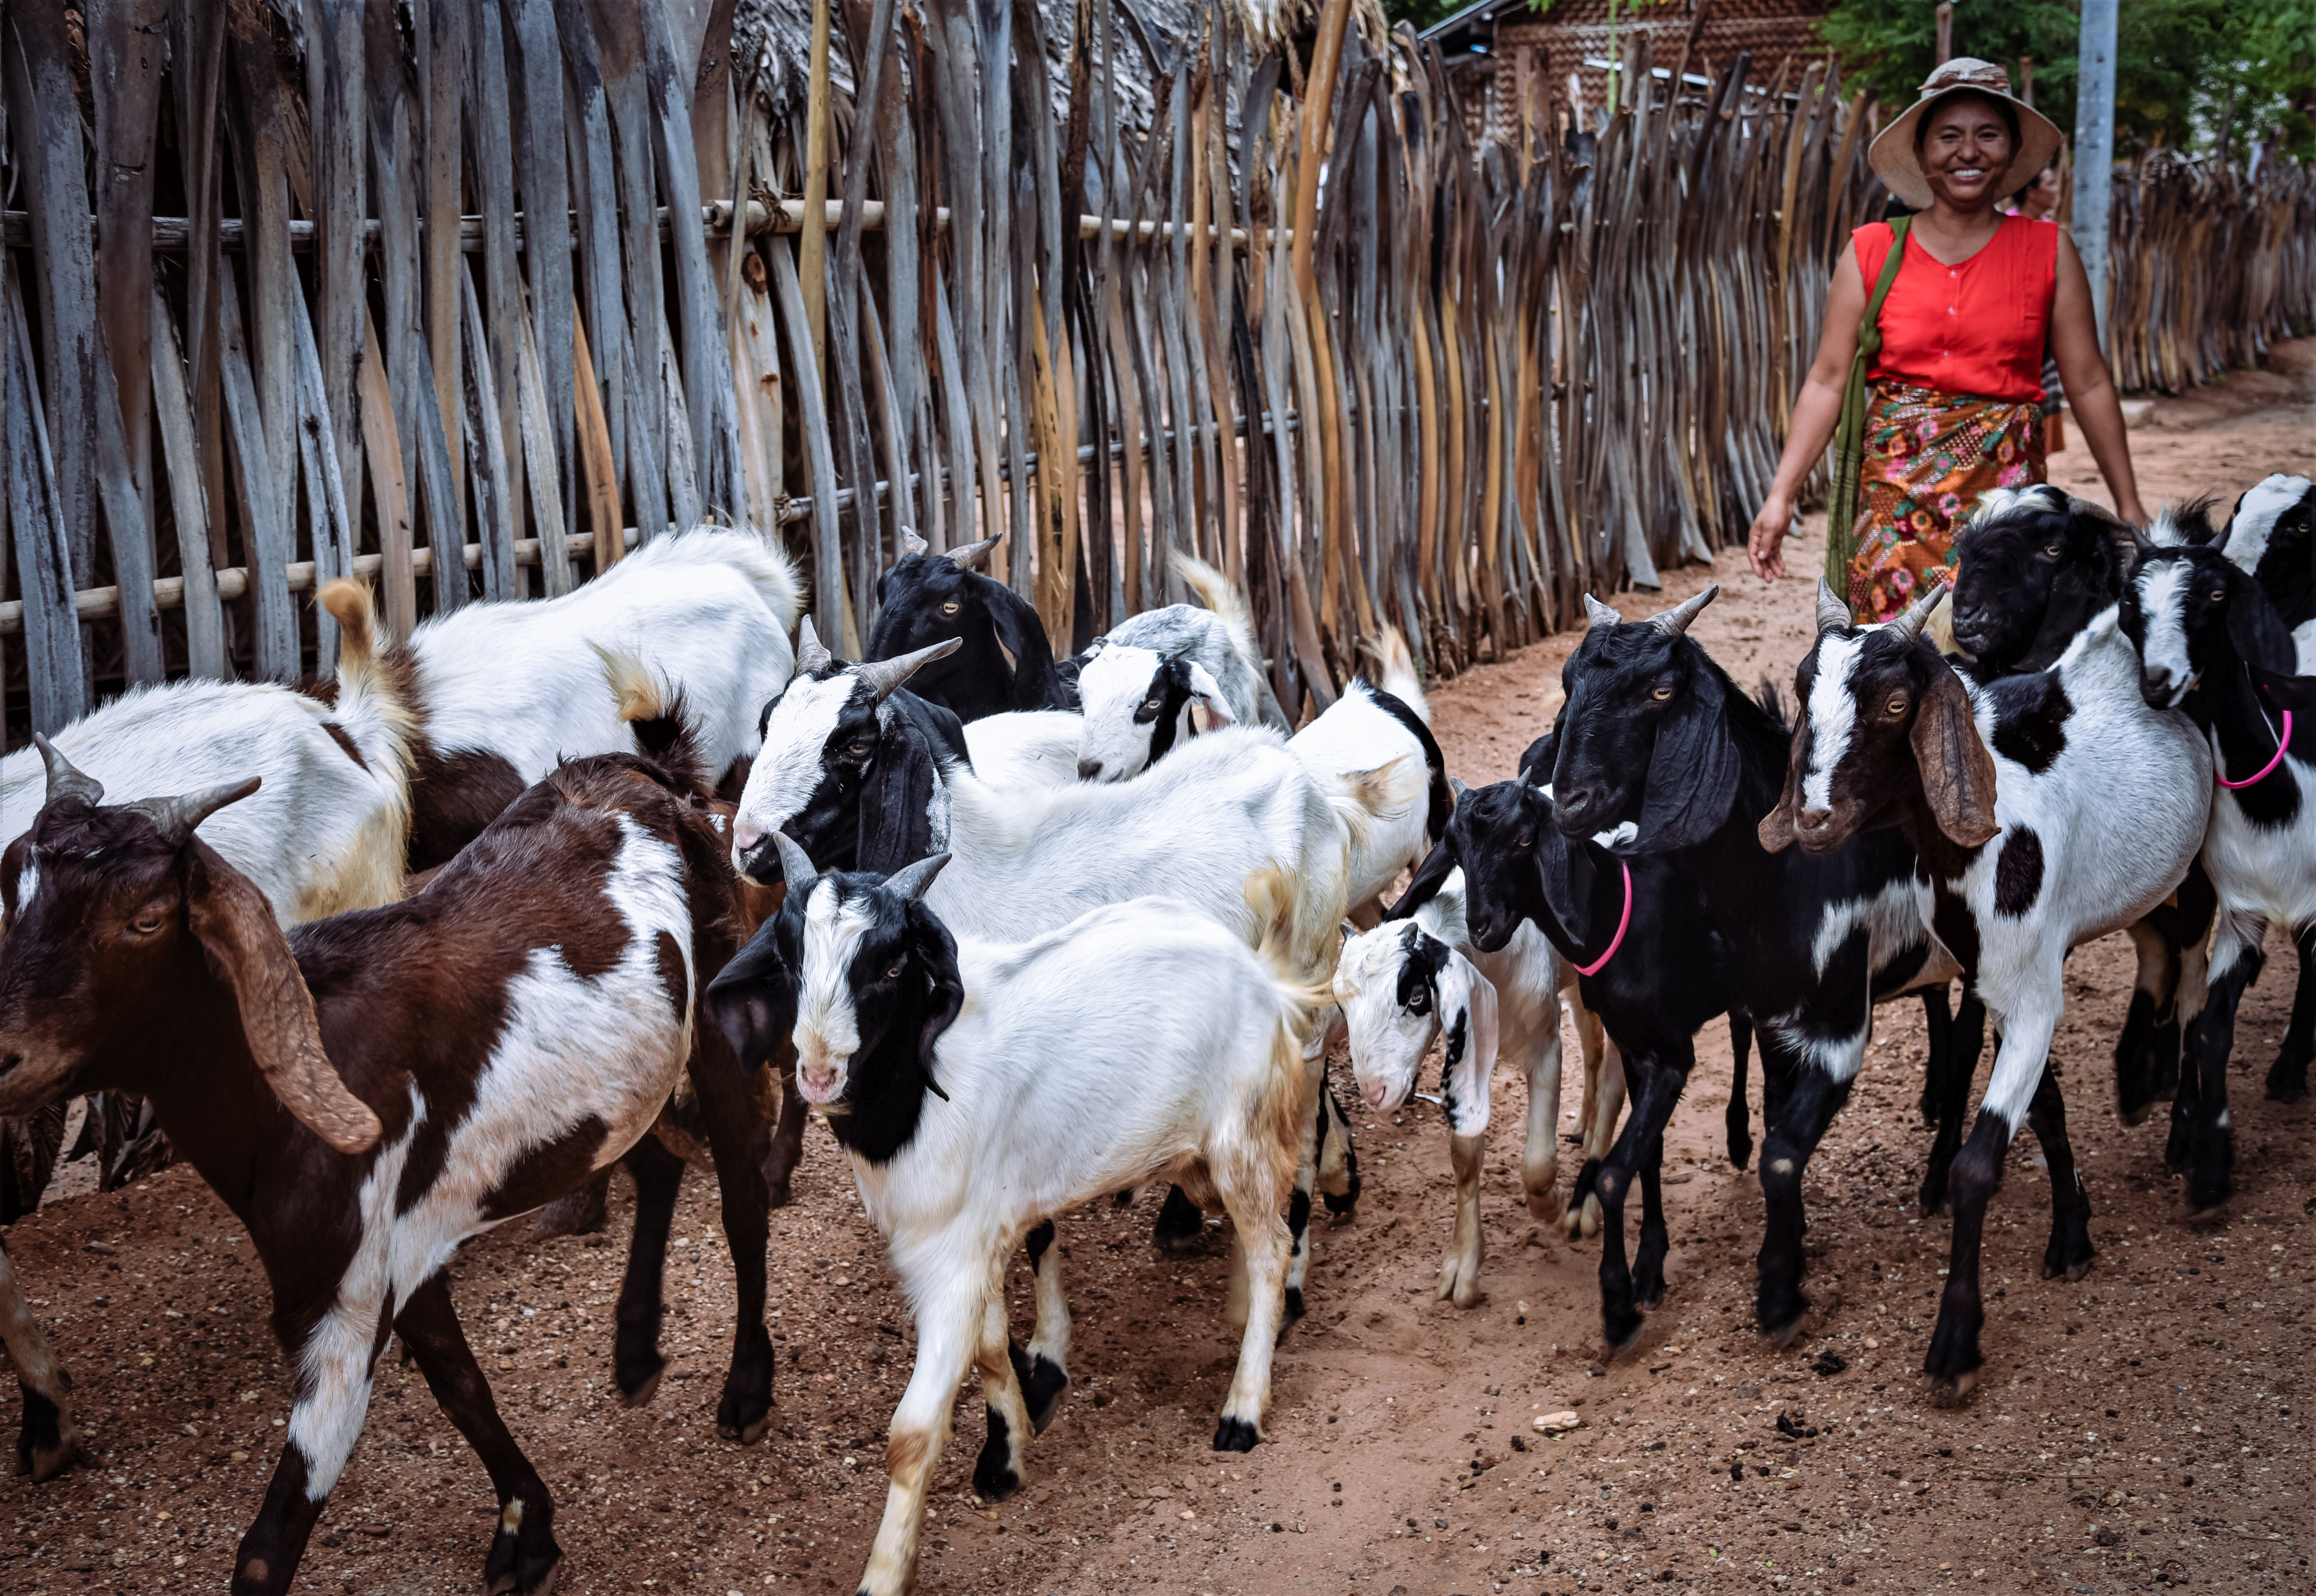 Daw Phyu Khine in Nyaung U Township, is one of many women, raising goats provided by UNDP’s livelihoods programme, enabling them to make a decent living